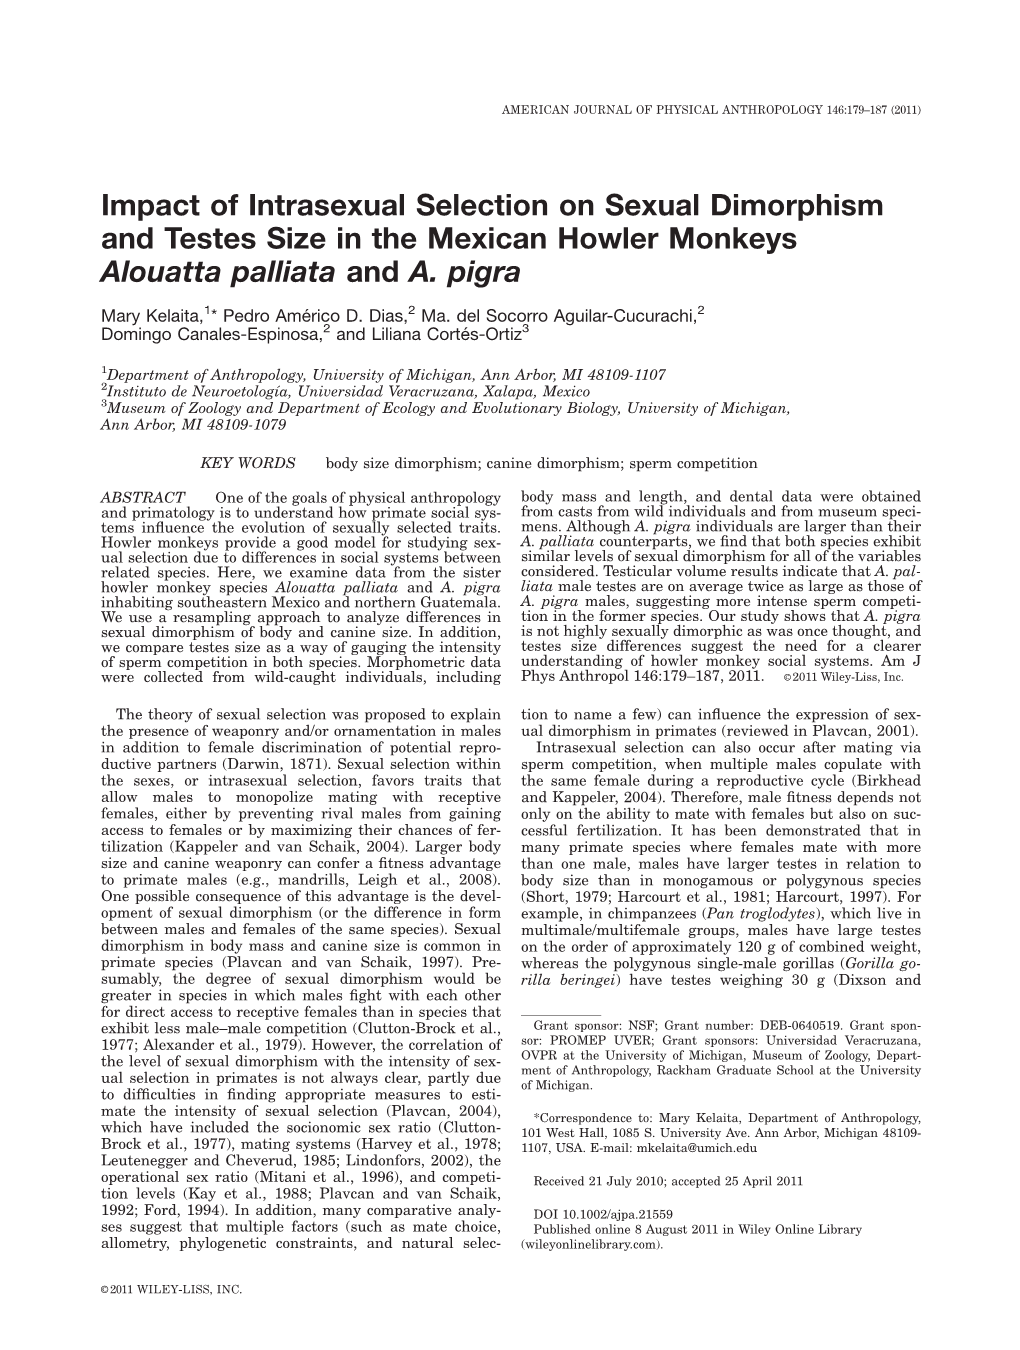 Impact of Intrasexual Selection on Sexual Dimorphism and Testes Size in the Mexican Howler Monkeys Alouatta Palliata and A